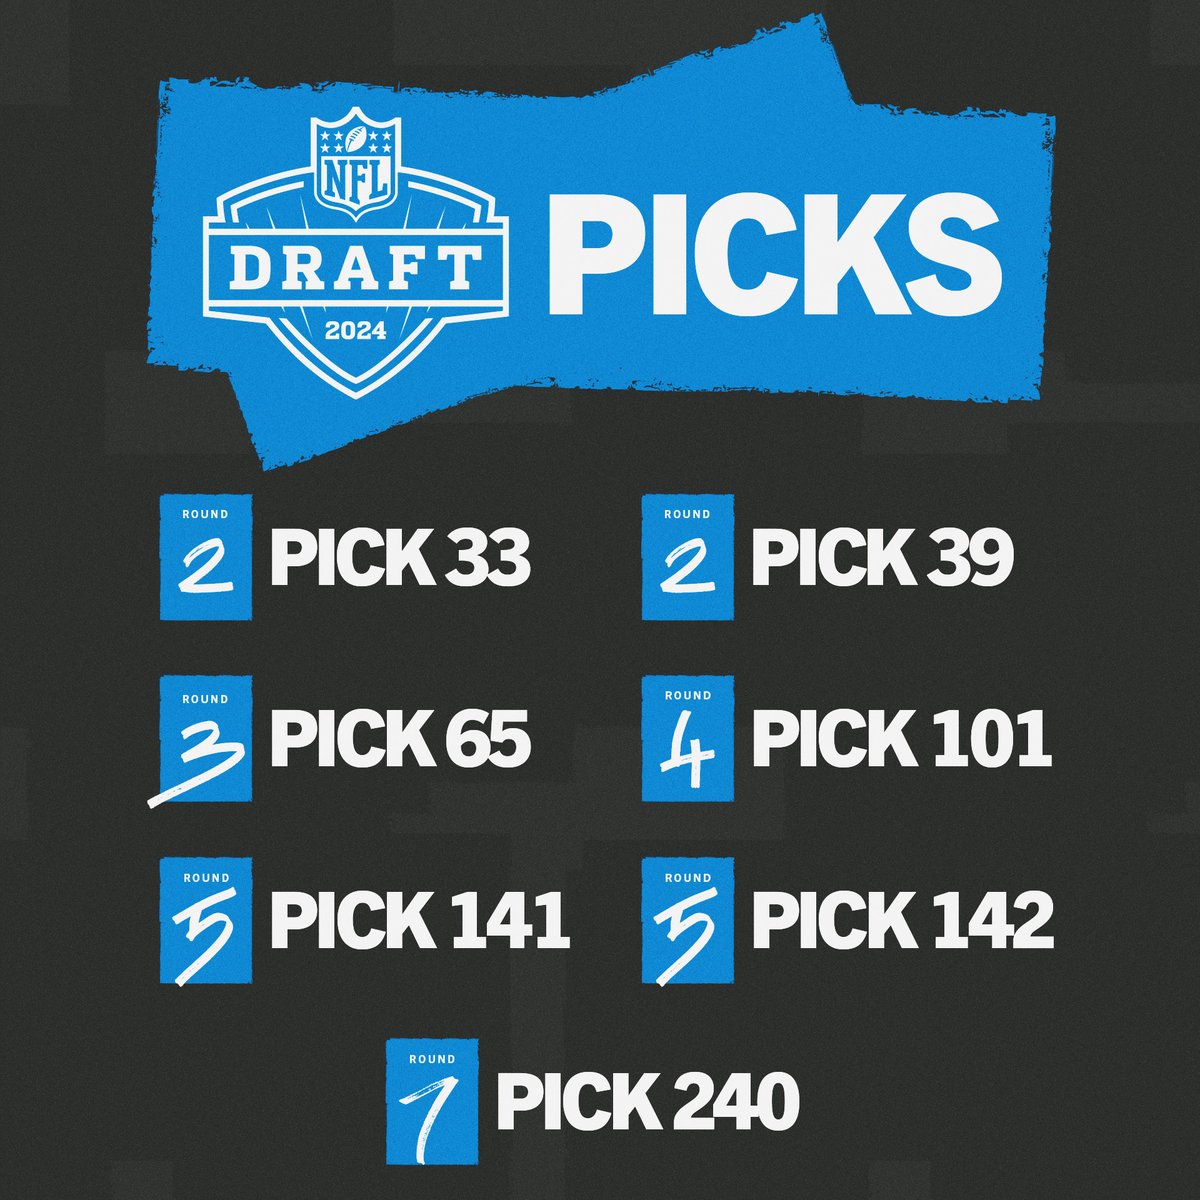 The lineup. #NFLDraft